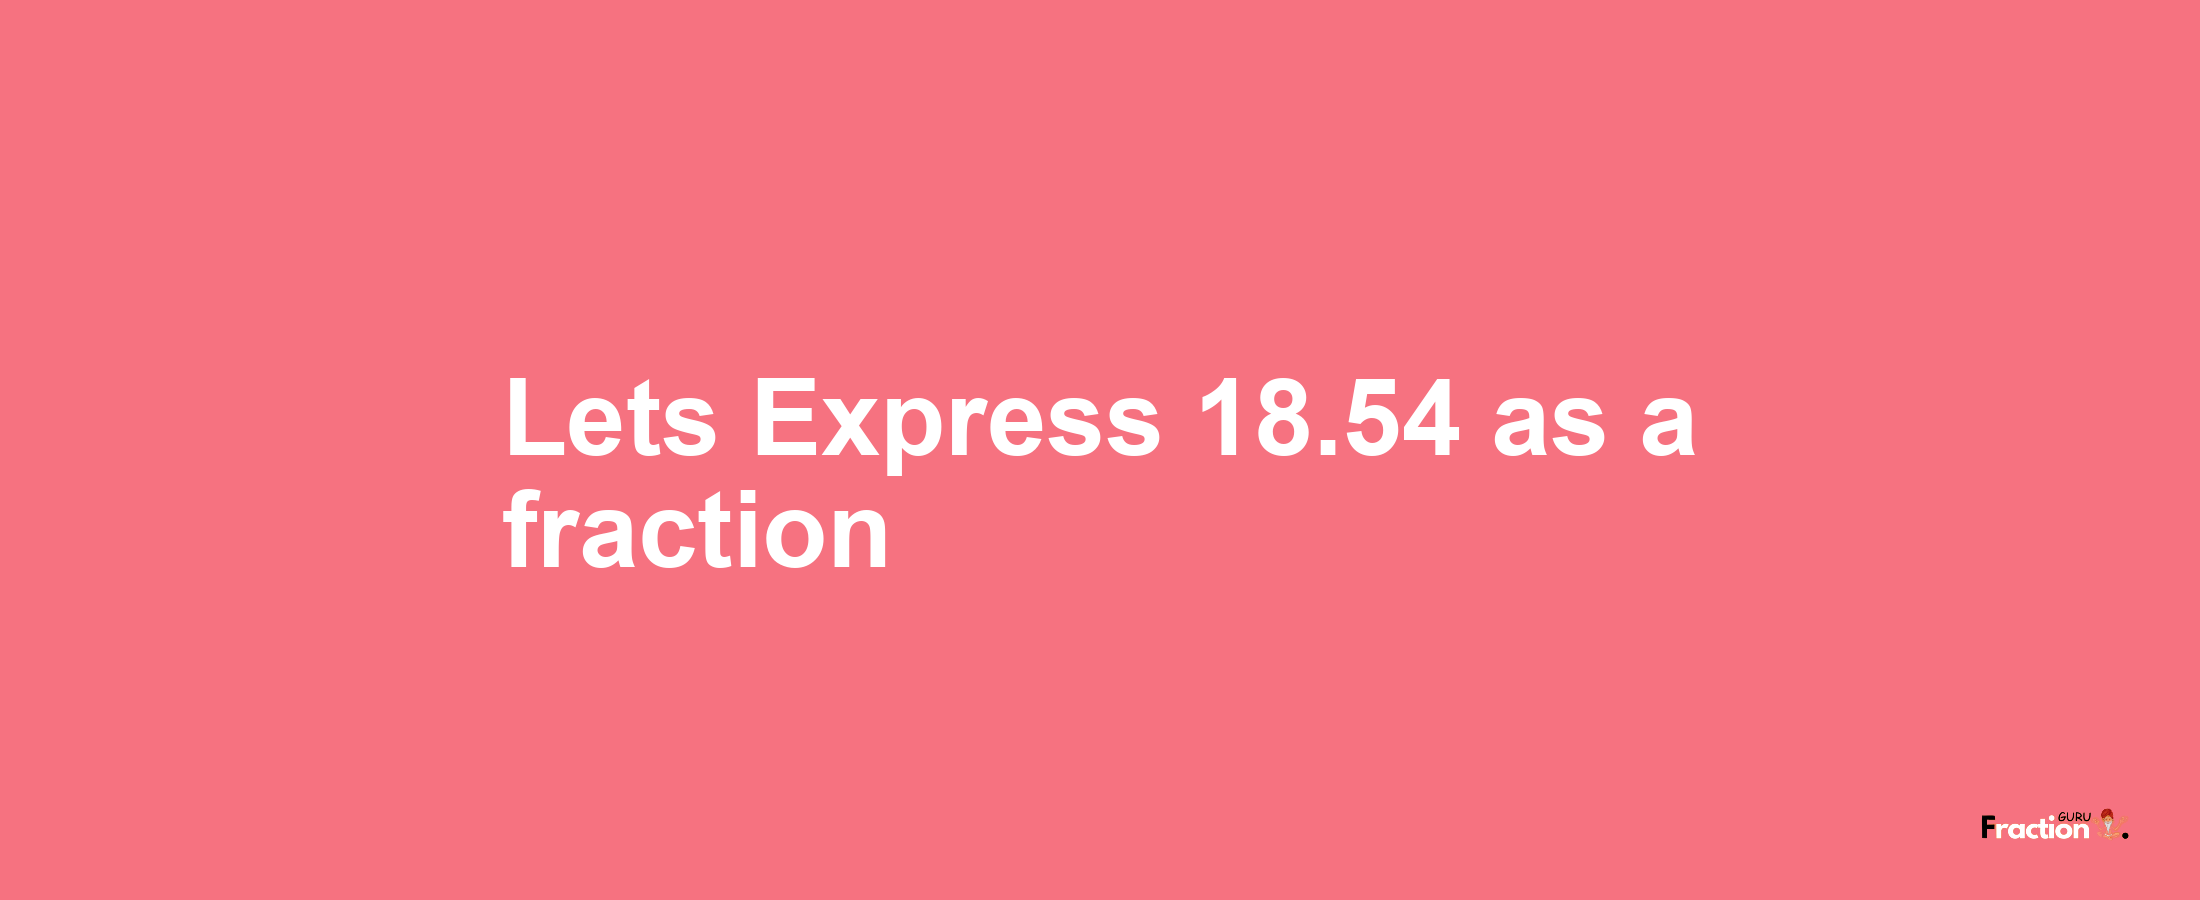 Lets Express 18.54 as afraction